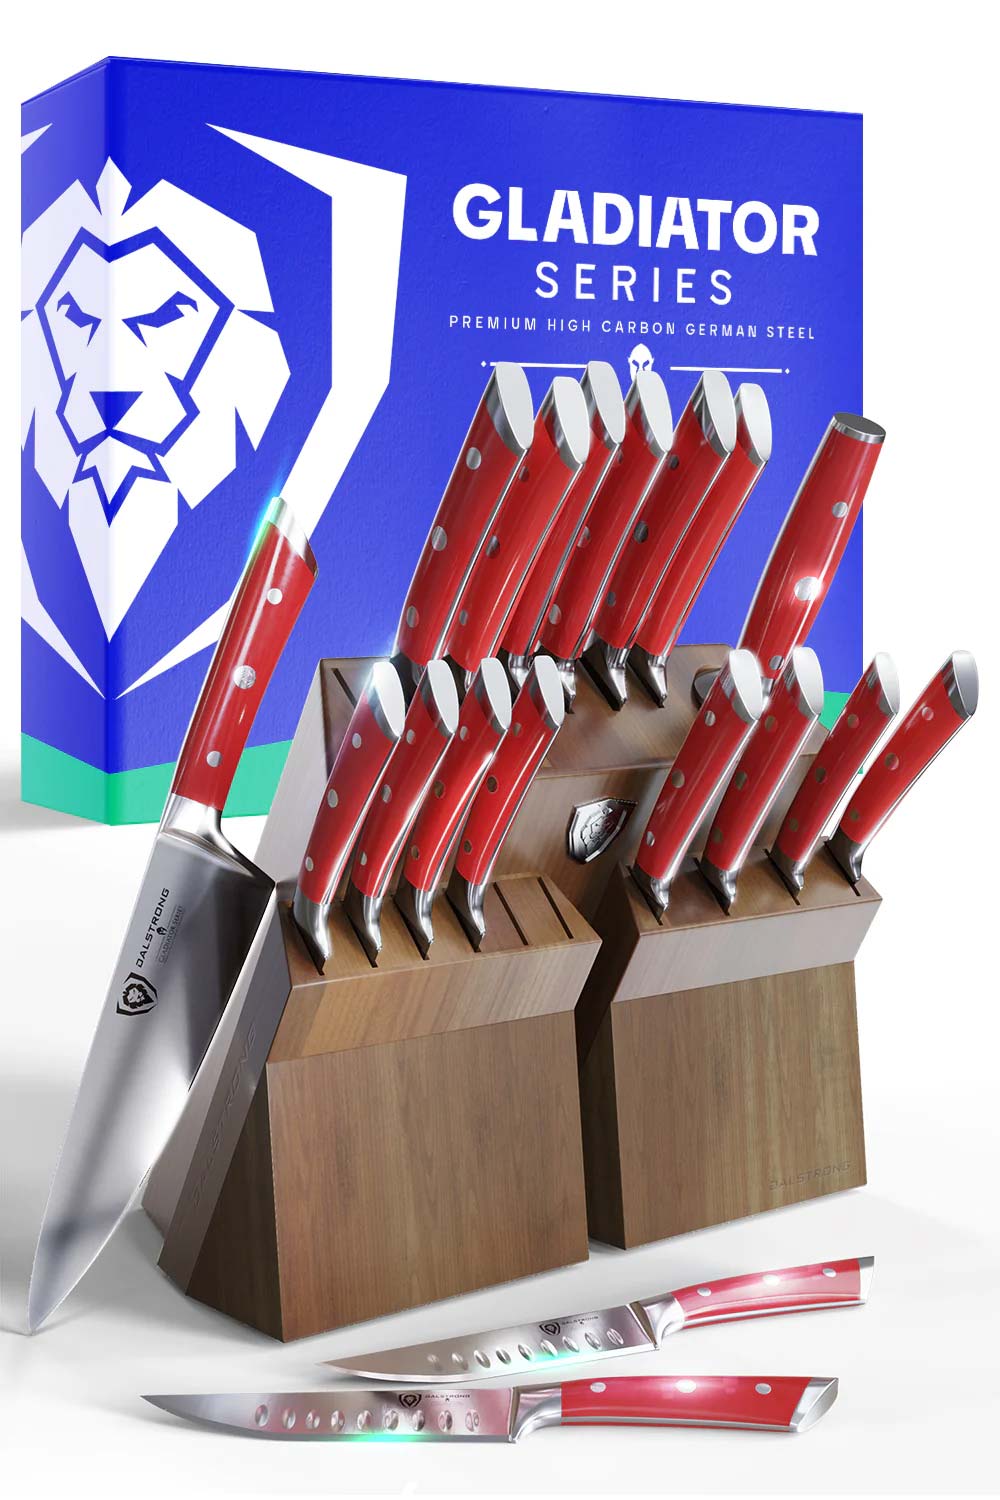 Dalstrong gladiator series 18 piece knife set with red handles and block in front of it's premium packaging.